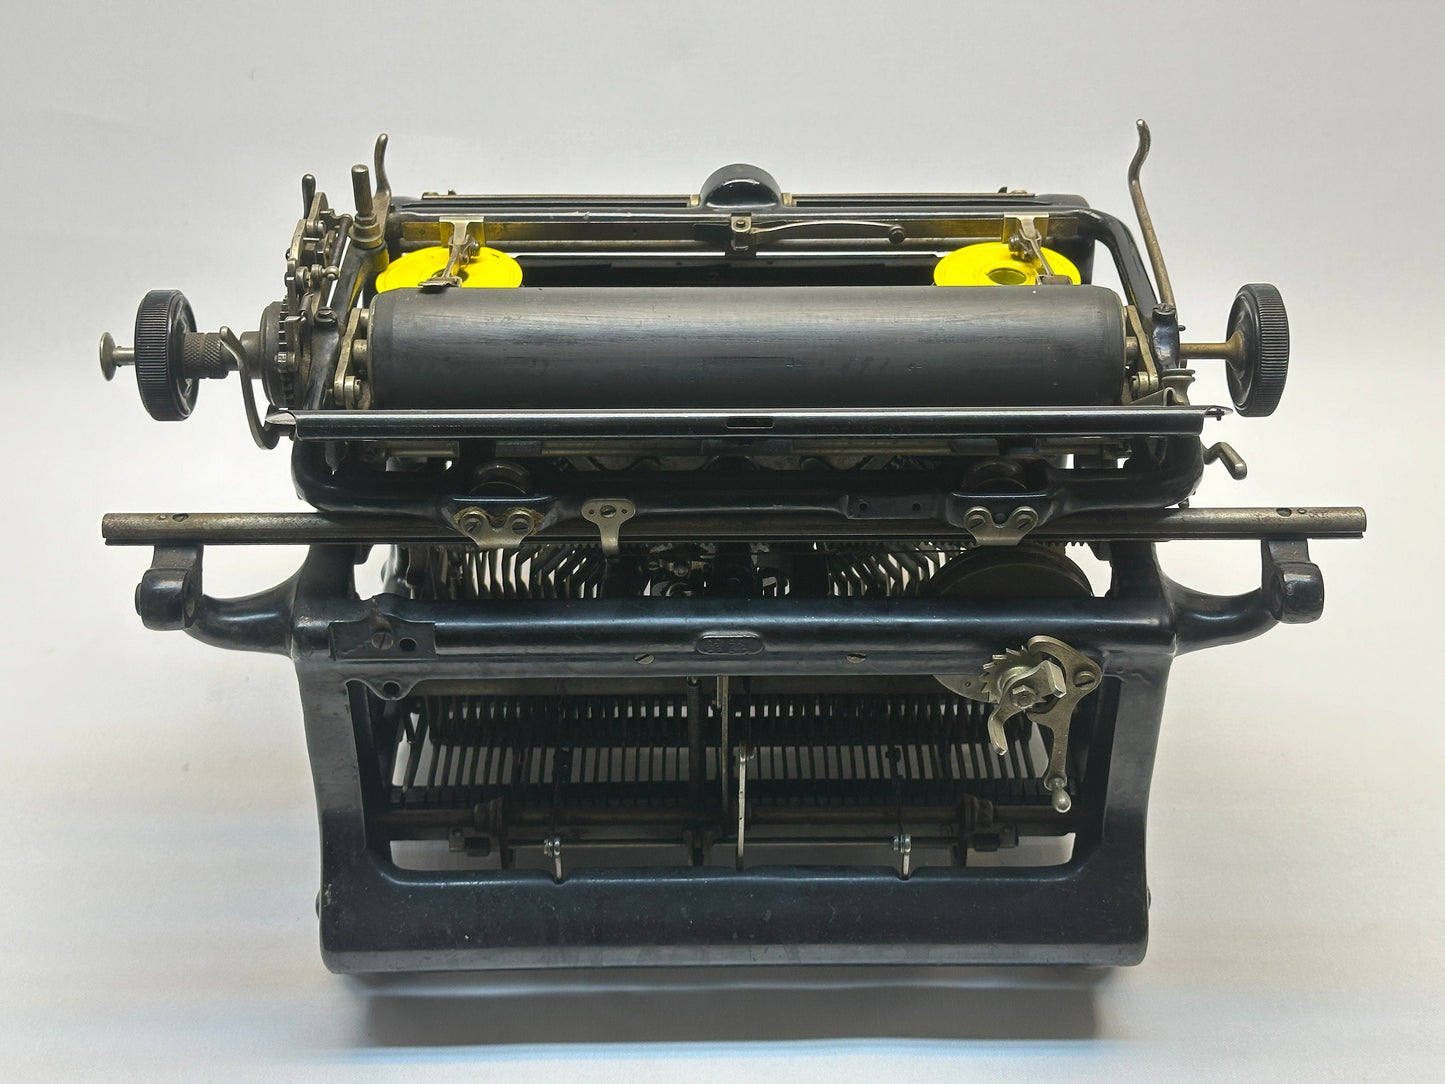 Continental Typewriter - 1939 Model with Glass Keyboard, Full-Size, Fully Functional